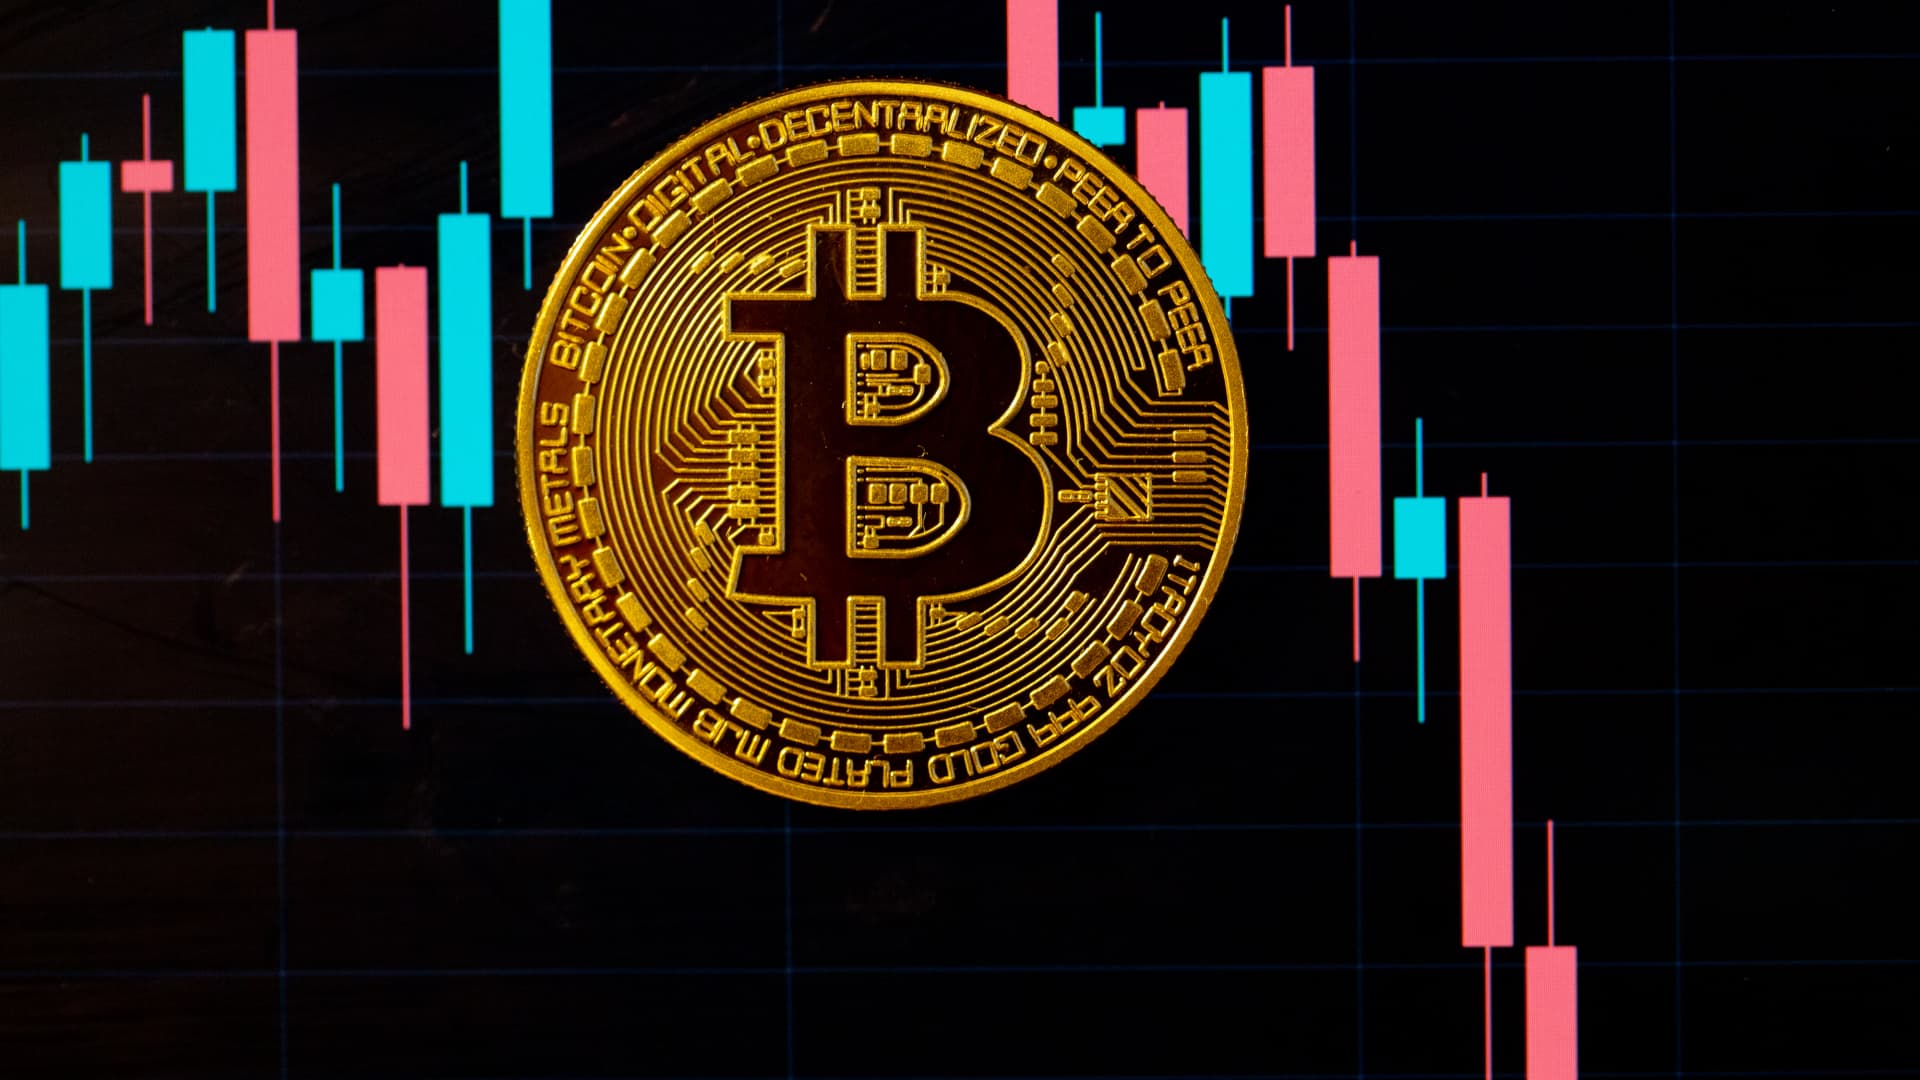 Bitcoin tumbles $5,000 in 24 hours as interest rates jump